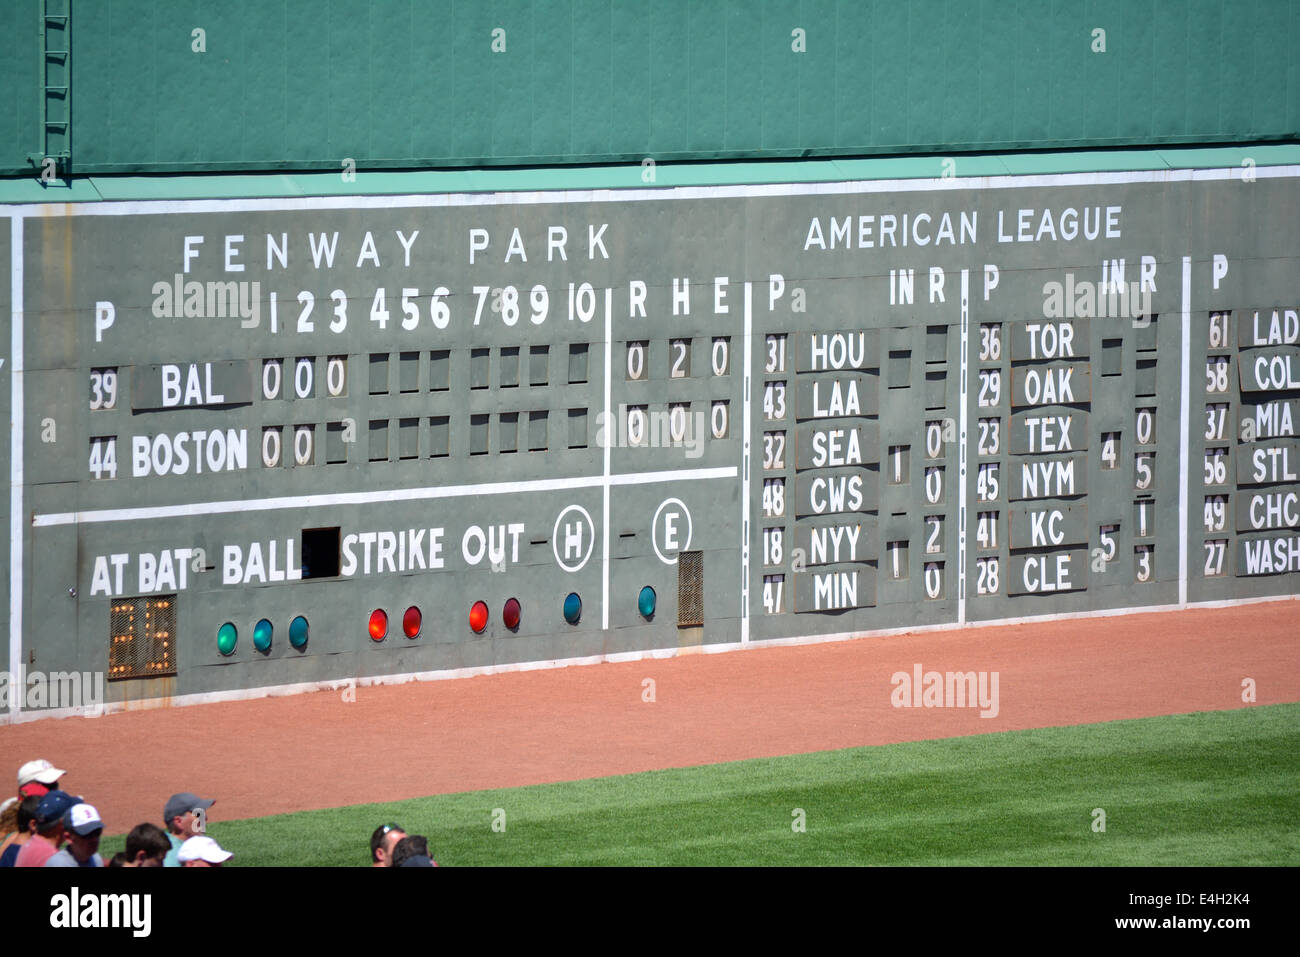 View of the Green Monster during a Major League Baseball game at Fenway Park in Boston. Stock Photo